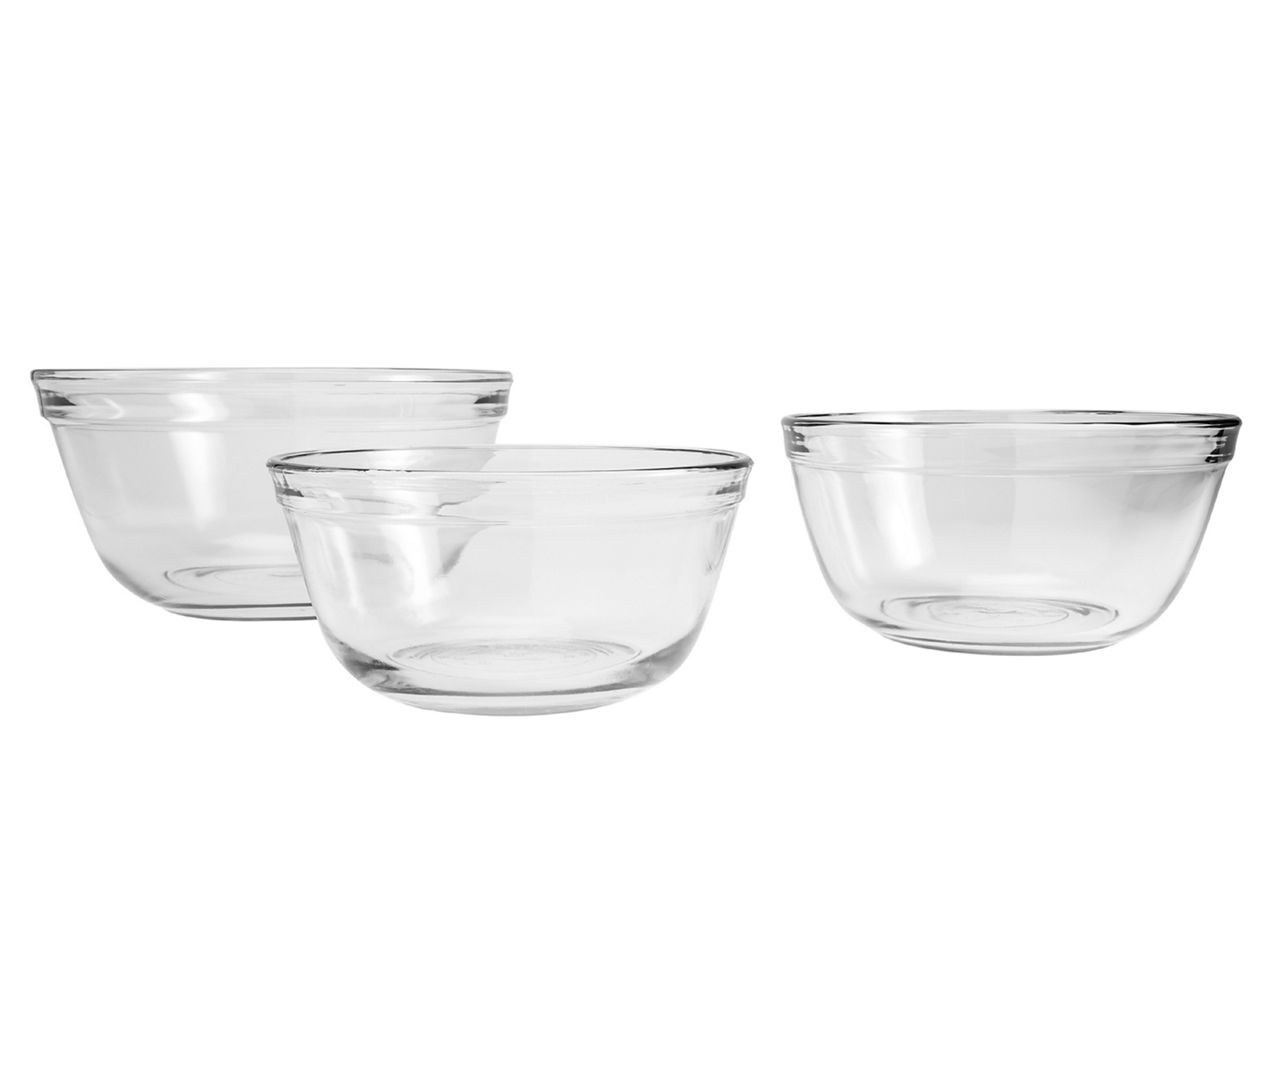 Mason Craft and More 3-Piece Glass Mixing Bowl Set - Clear